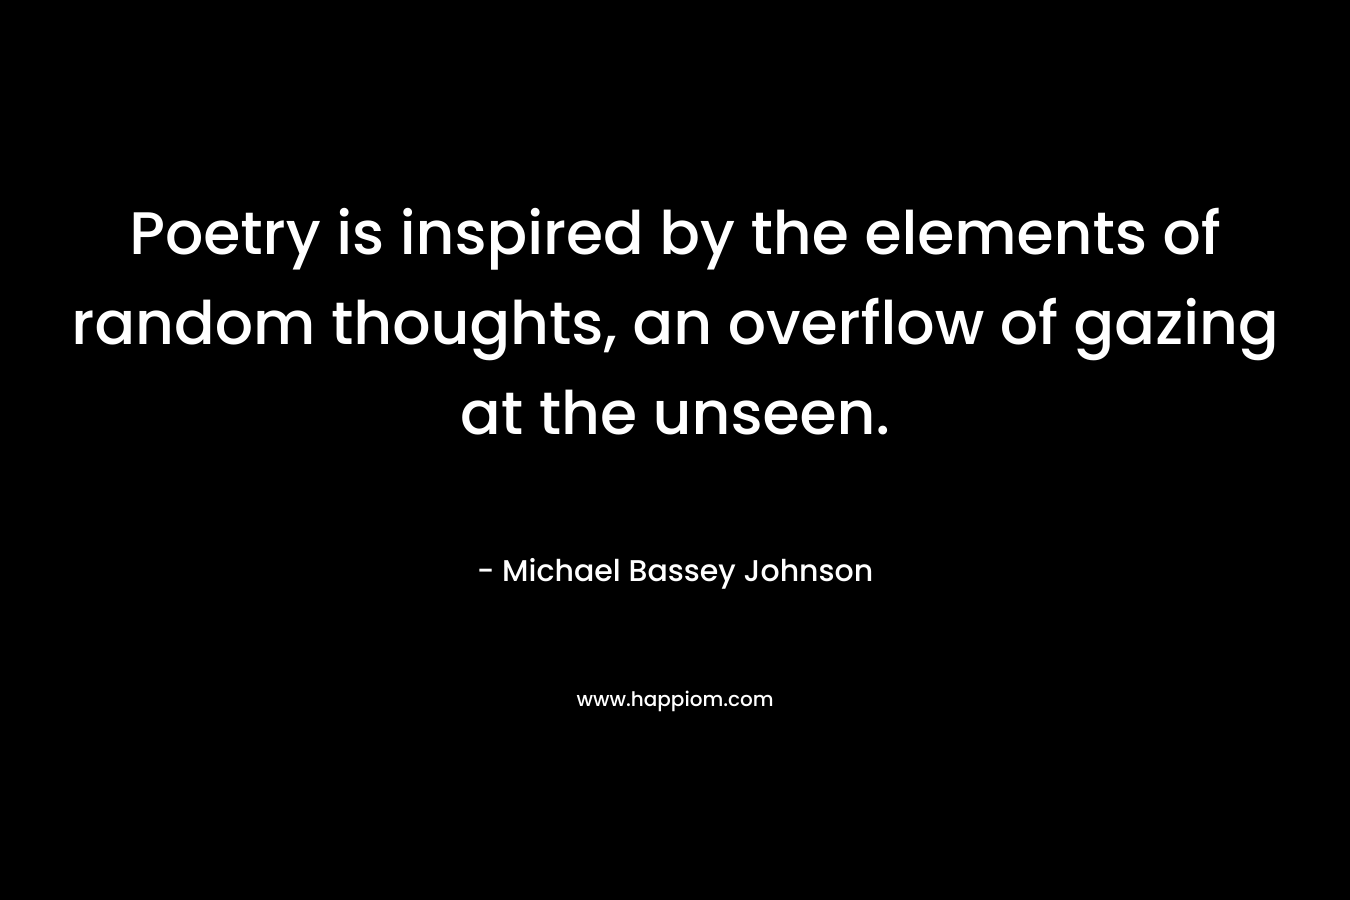 Poetry is inspired by the elements of random thoughts, an overflow of gazing at the unseen.